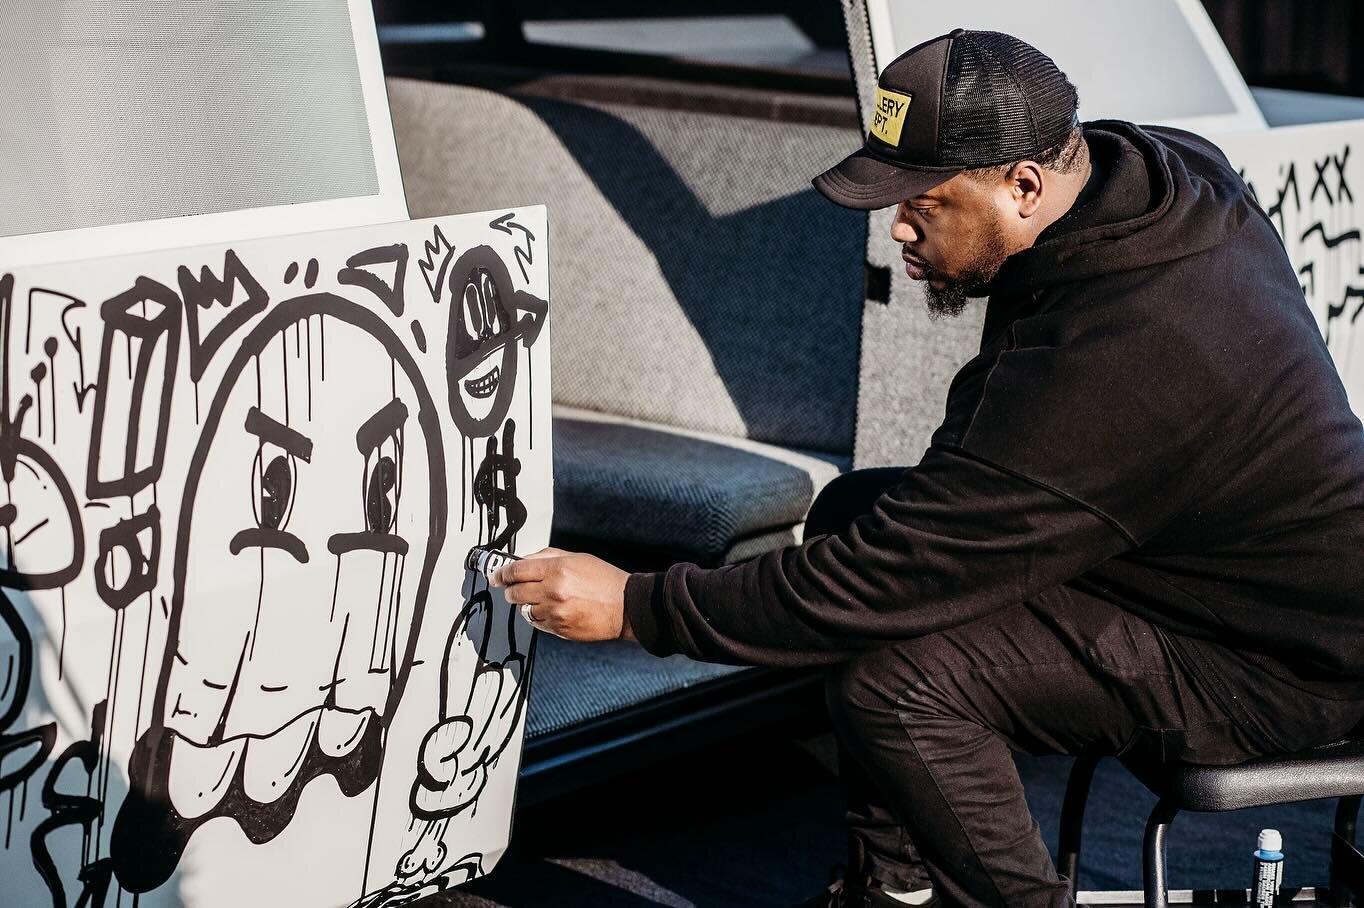 @steviemac415, co-owner of @mymusegr was doing his thing at the @grautoshow graffiti painting a custom car built by @joeyruiter 

If you have not had an opportunity to stop by, the show runs until February 4th!

Graffiti Markers: @machinestudio
Locat